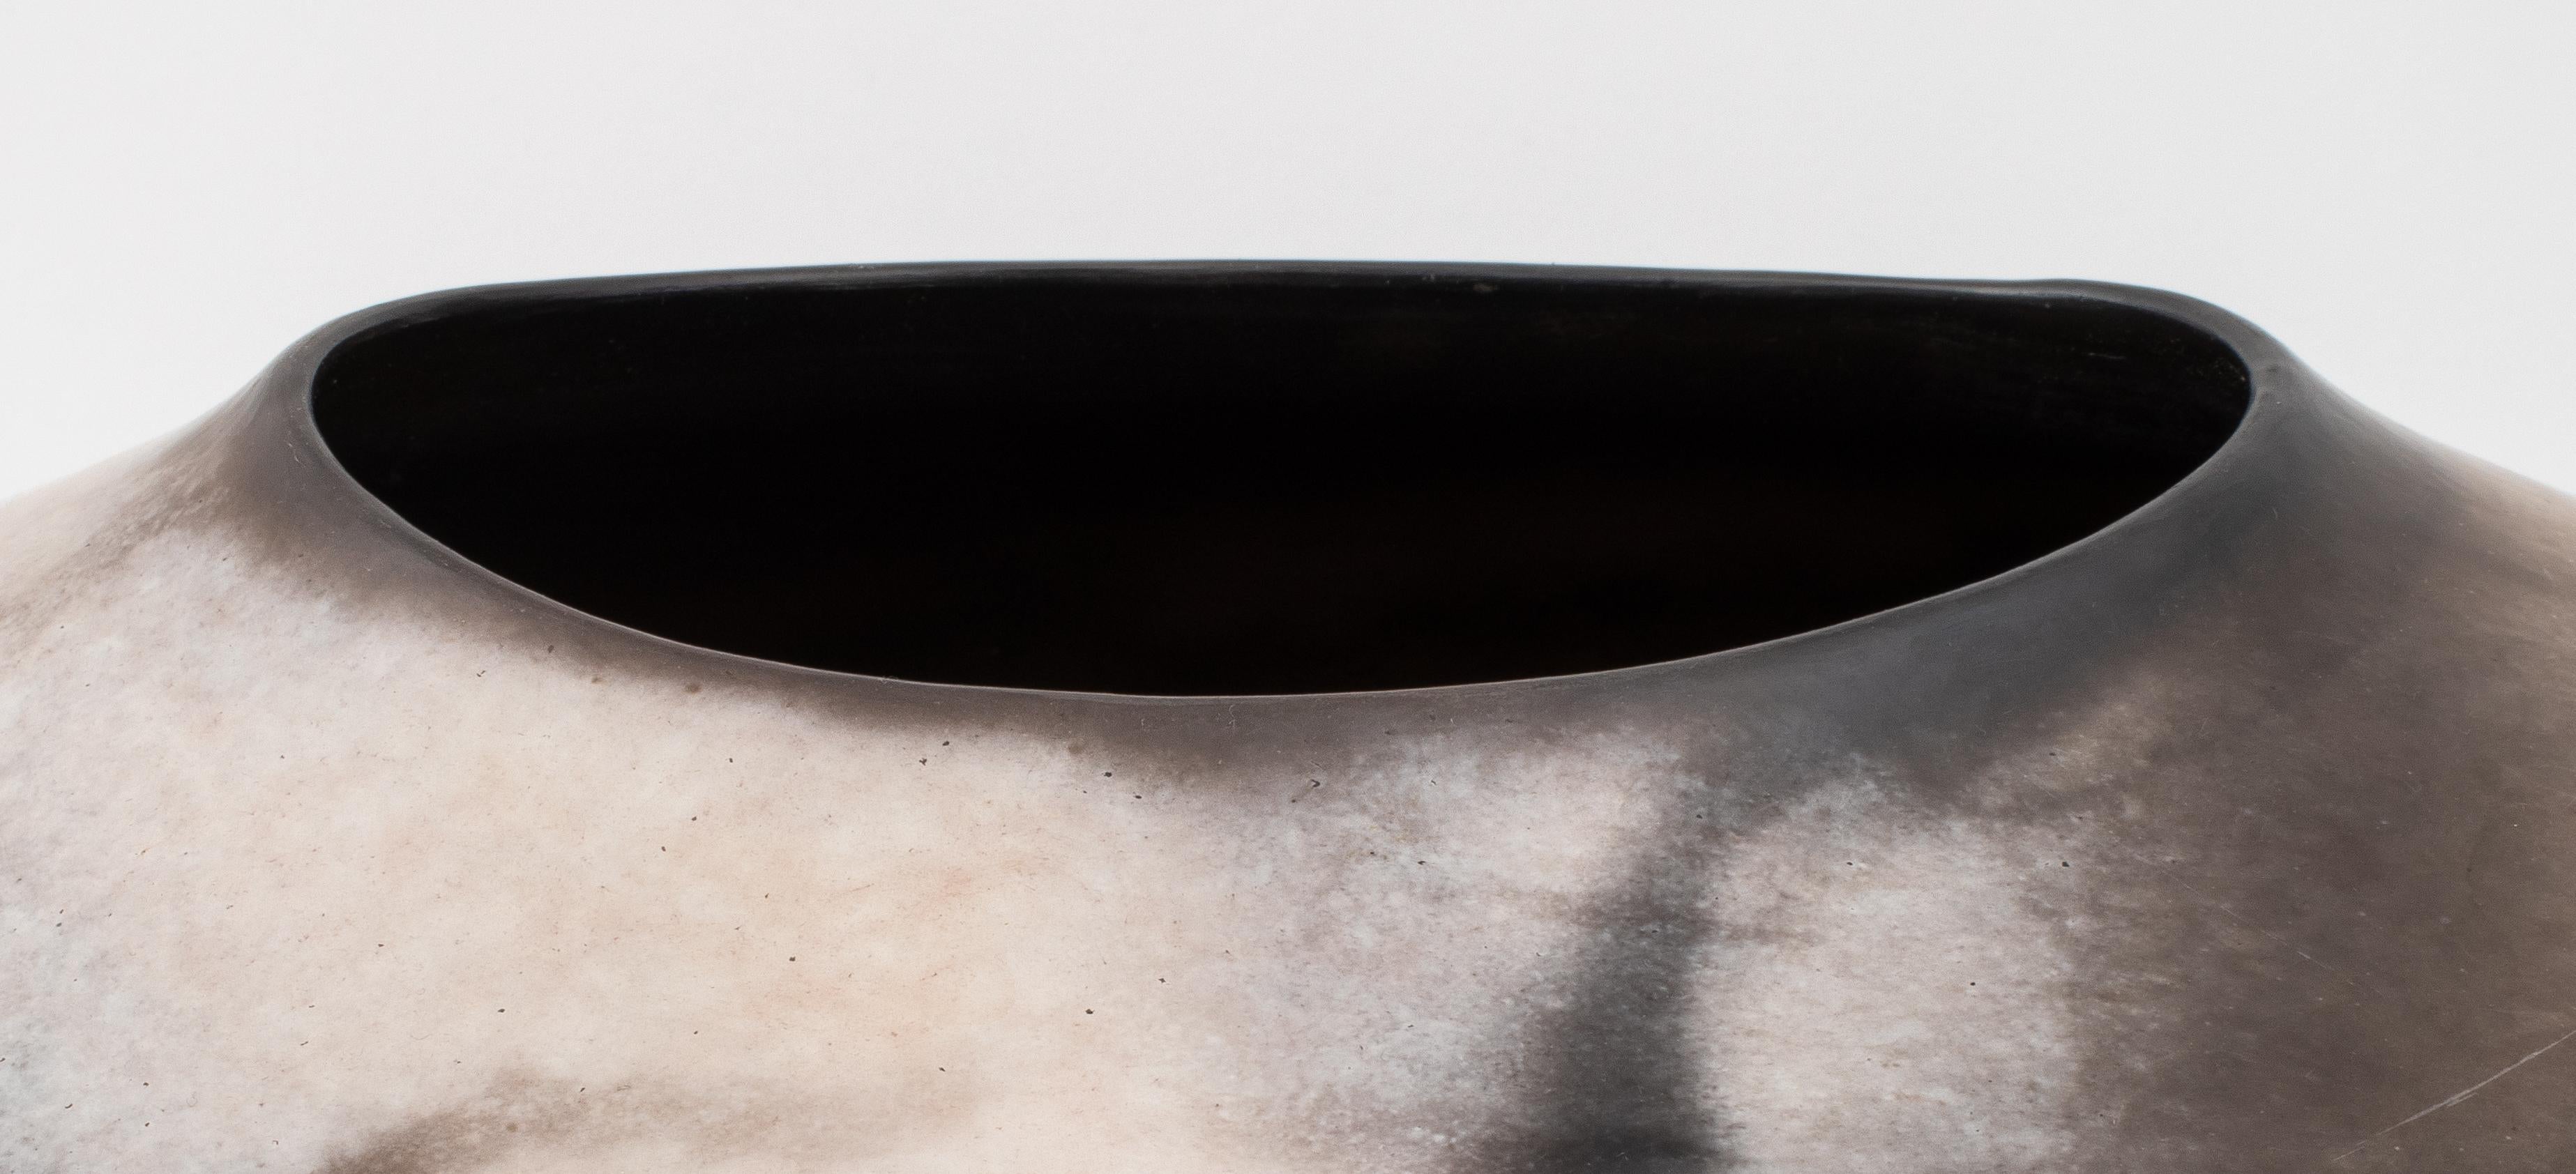 Gabriele Koch (German, b.1948), large contemporary ceramic art pottery ornamental bowl, smoke-fired and burnished earthenware, with delicate mottled cream, ochre and grey colors, incised signature on bottom.
Dimensions:  12